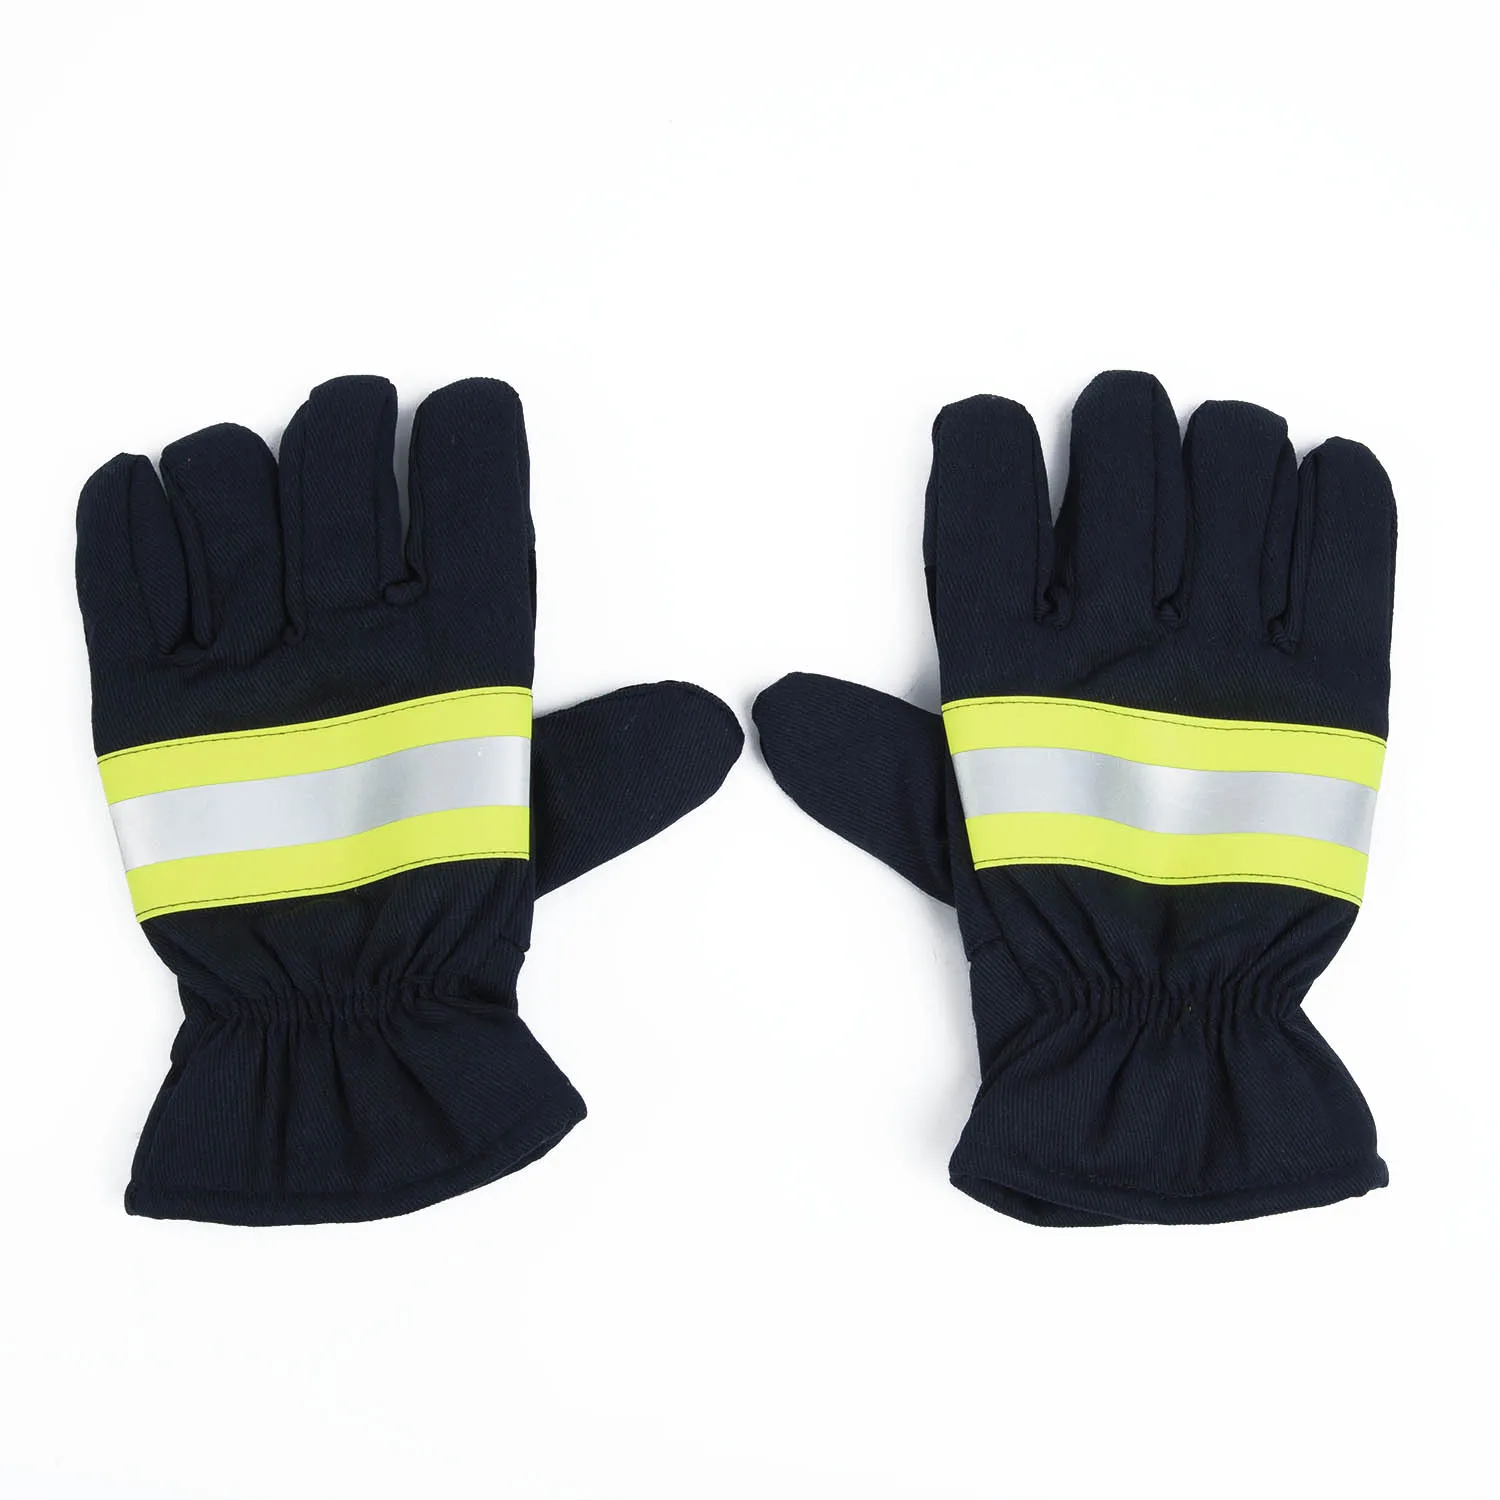 for Welding Fire Proof Flame-retardant Heat Proof Gloves Non-slip Anti-fire Gloves for Cold weather High Quality NEW enlarge